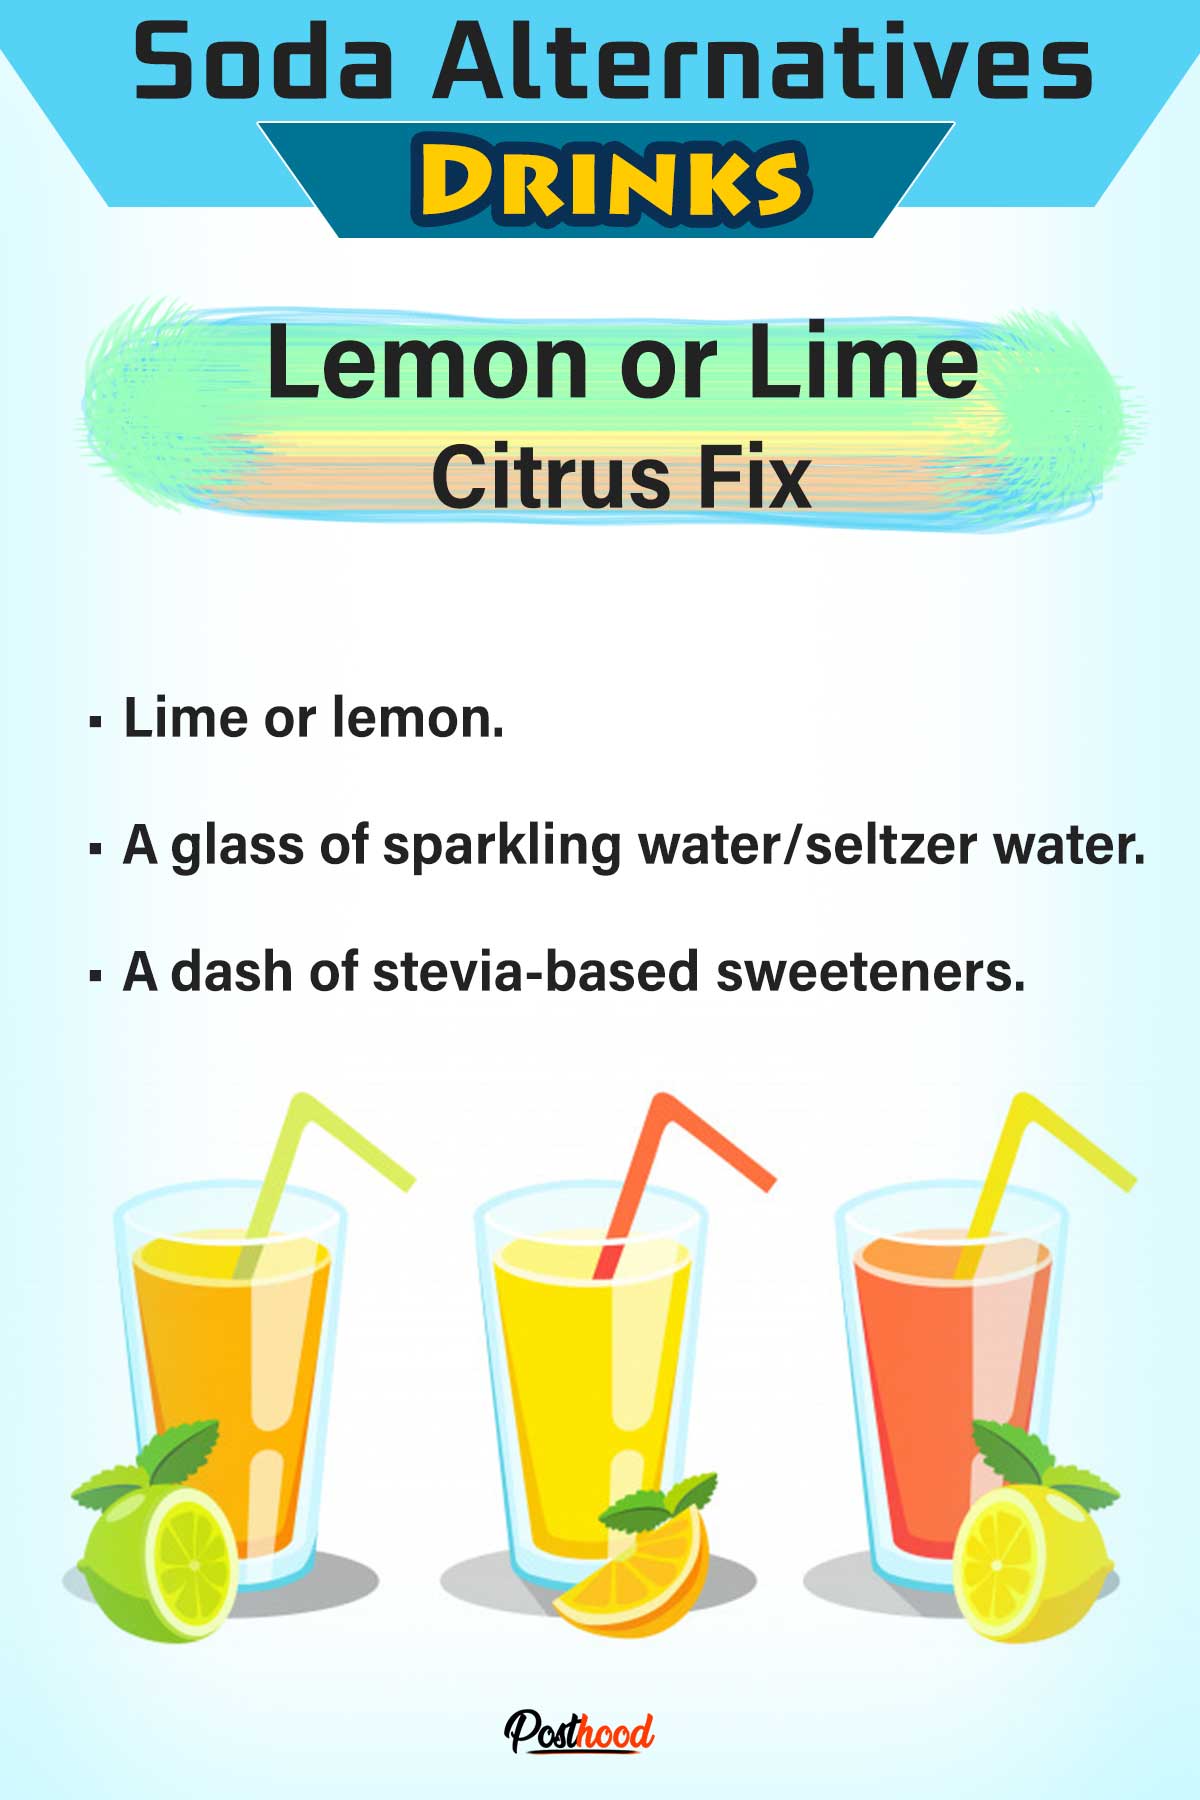 How to cut down soda drinks? Try this fresh lime soda alternatives drinks to replace soda. Healthiest homemade drinks for people on No-Soda Challenge.